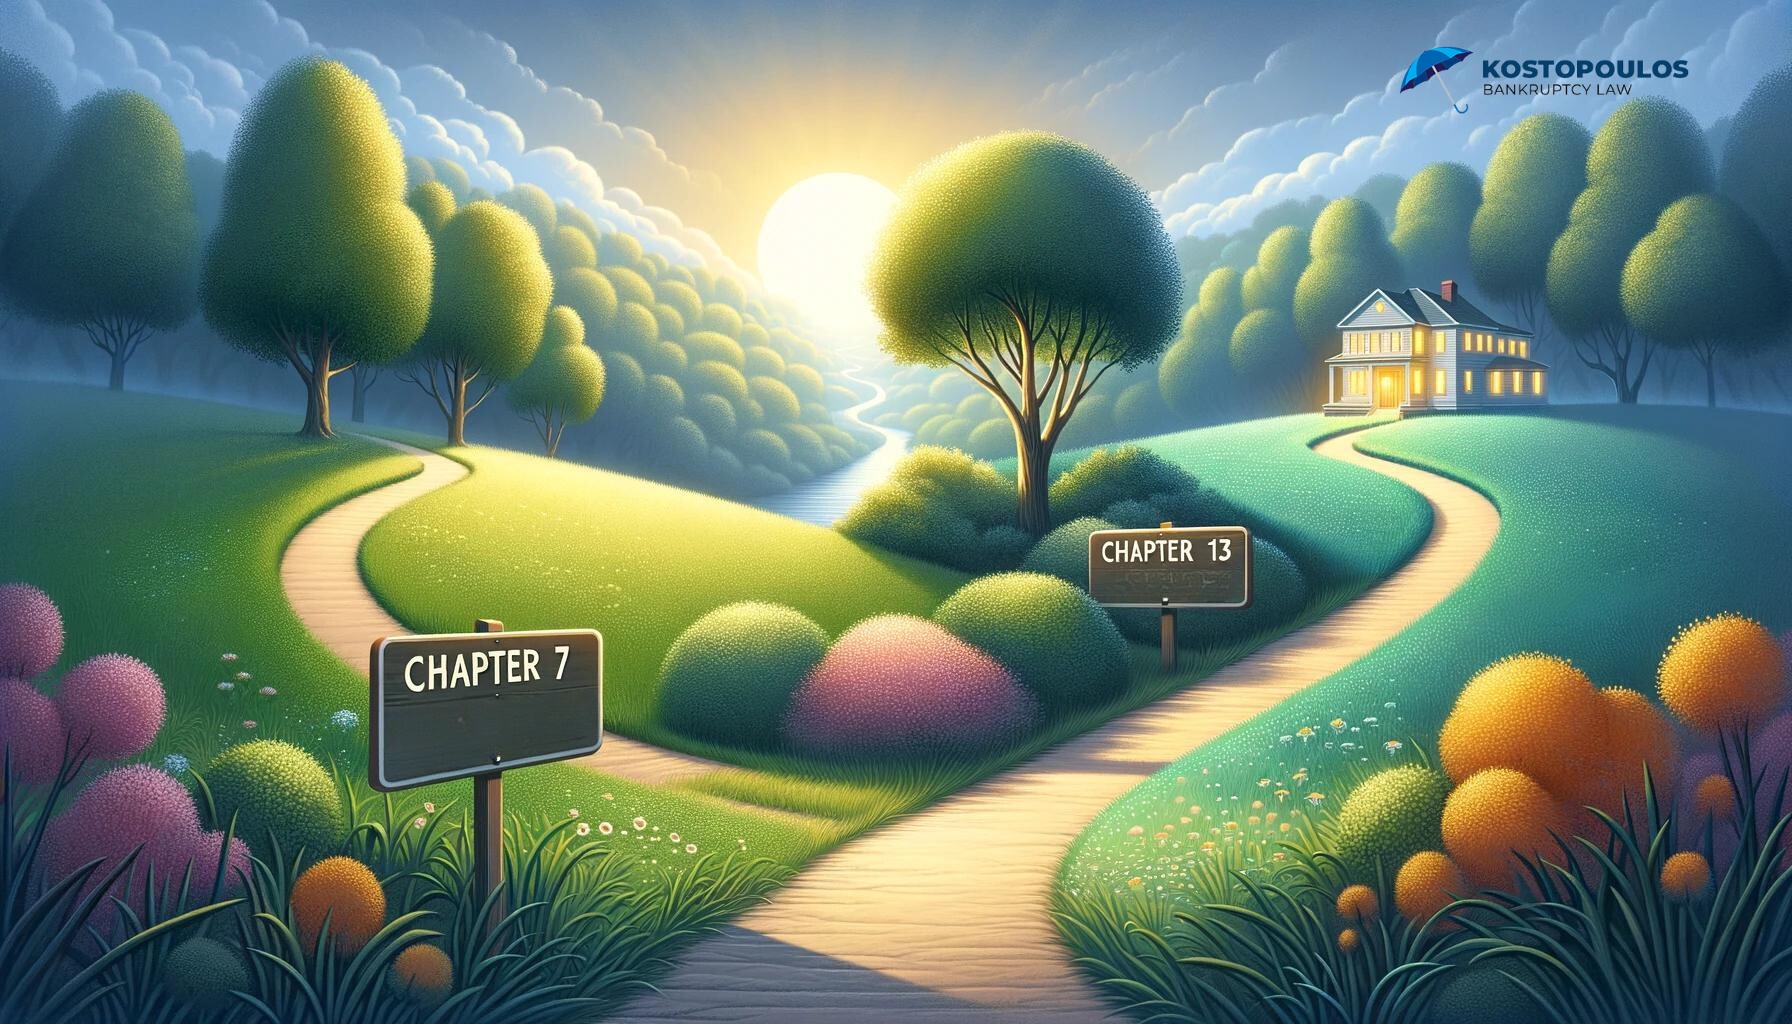 A serene landscape depicting a path splitting into two, symbolizing the choice between Chapter 7 and Chapter 13 bankruptcy. This image reflects the journey of making informed financial decisions.